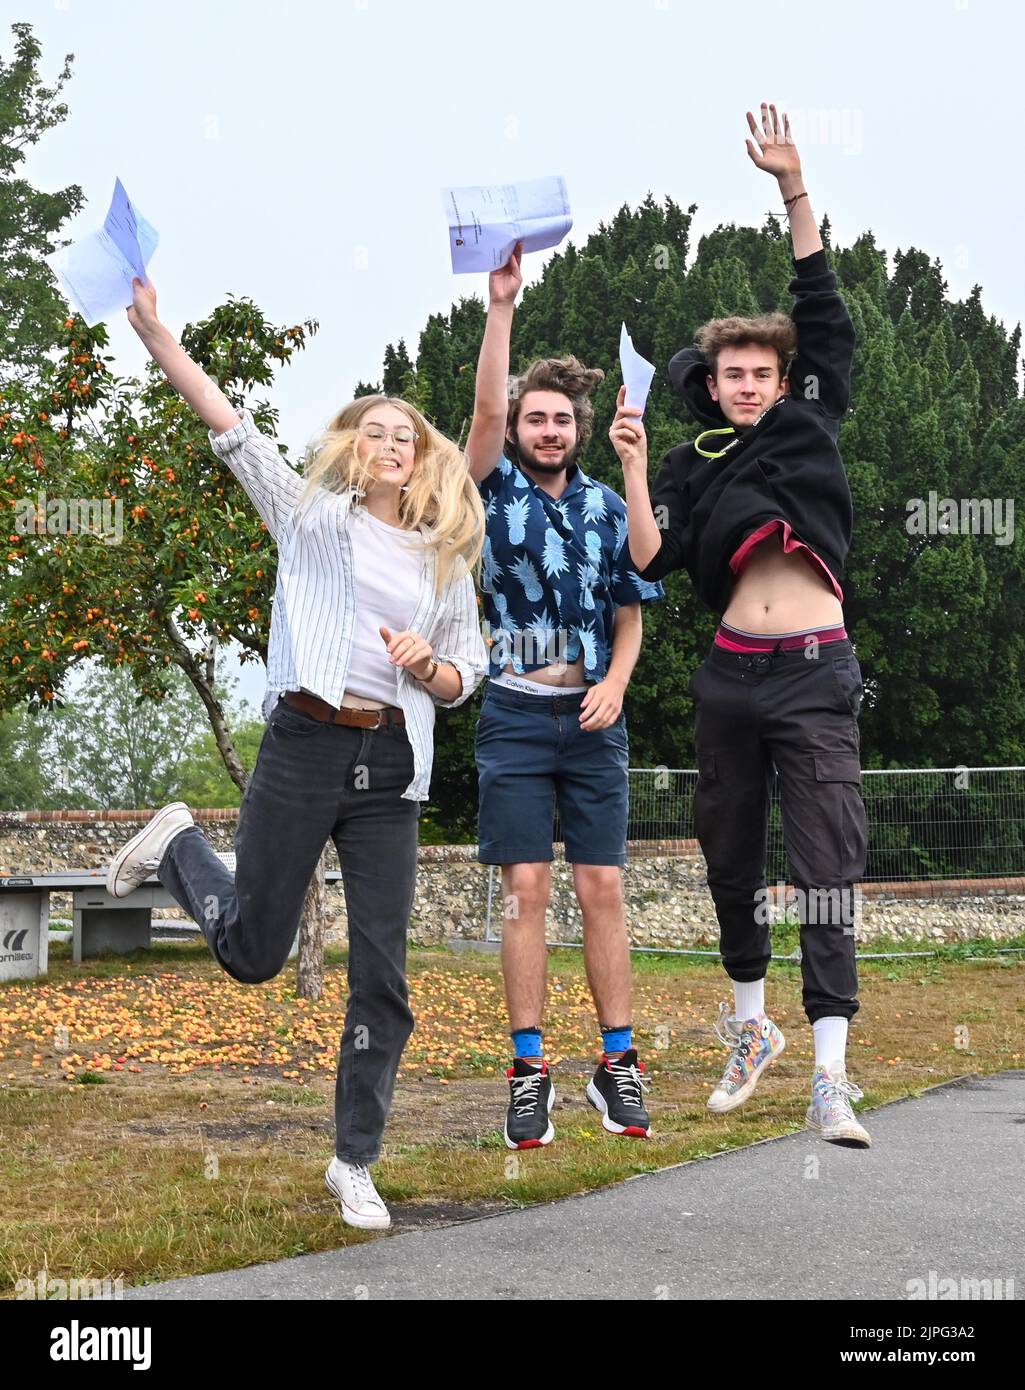 Lewes UK 18th August 2020 - Students leap for joy as they are delighted after receiving their  A Level Results from Lewes Old Grammar School in East Sussex today . Belle will be going to Cambridge University  : Credit Simon Dack / Vervate / Alamy Live News Stock Photo